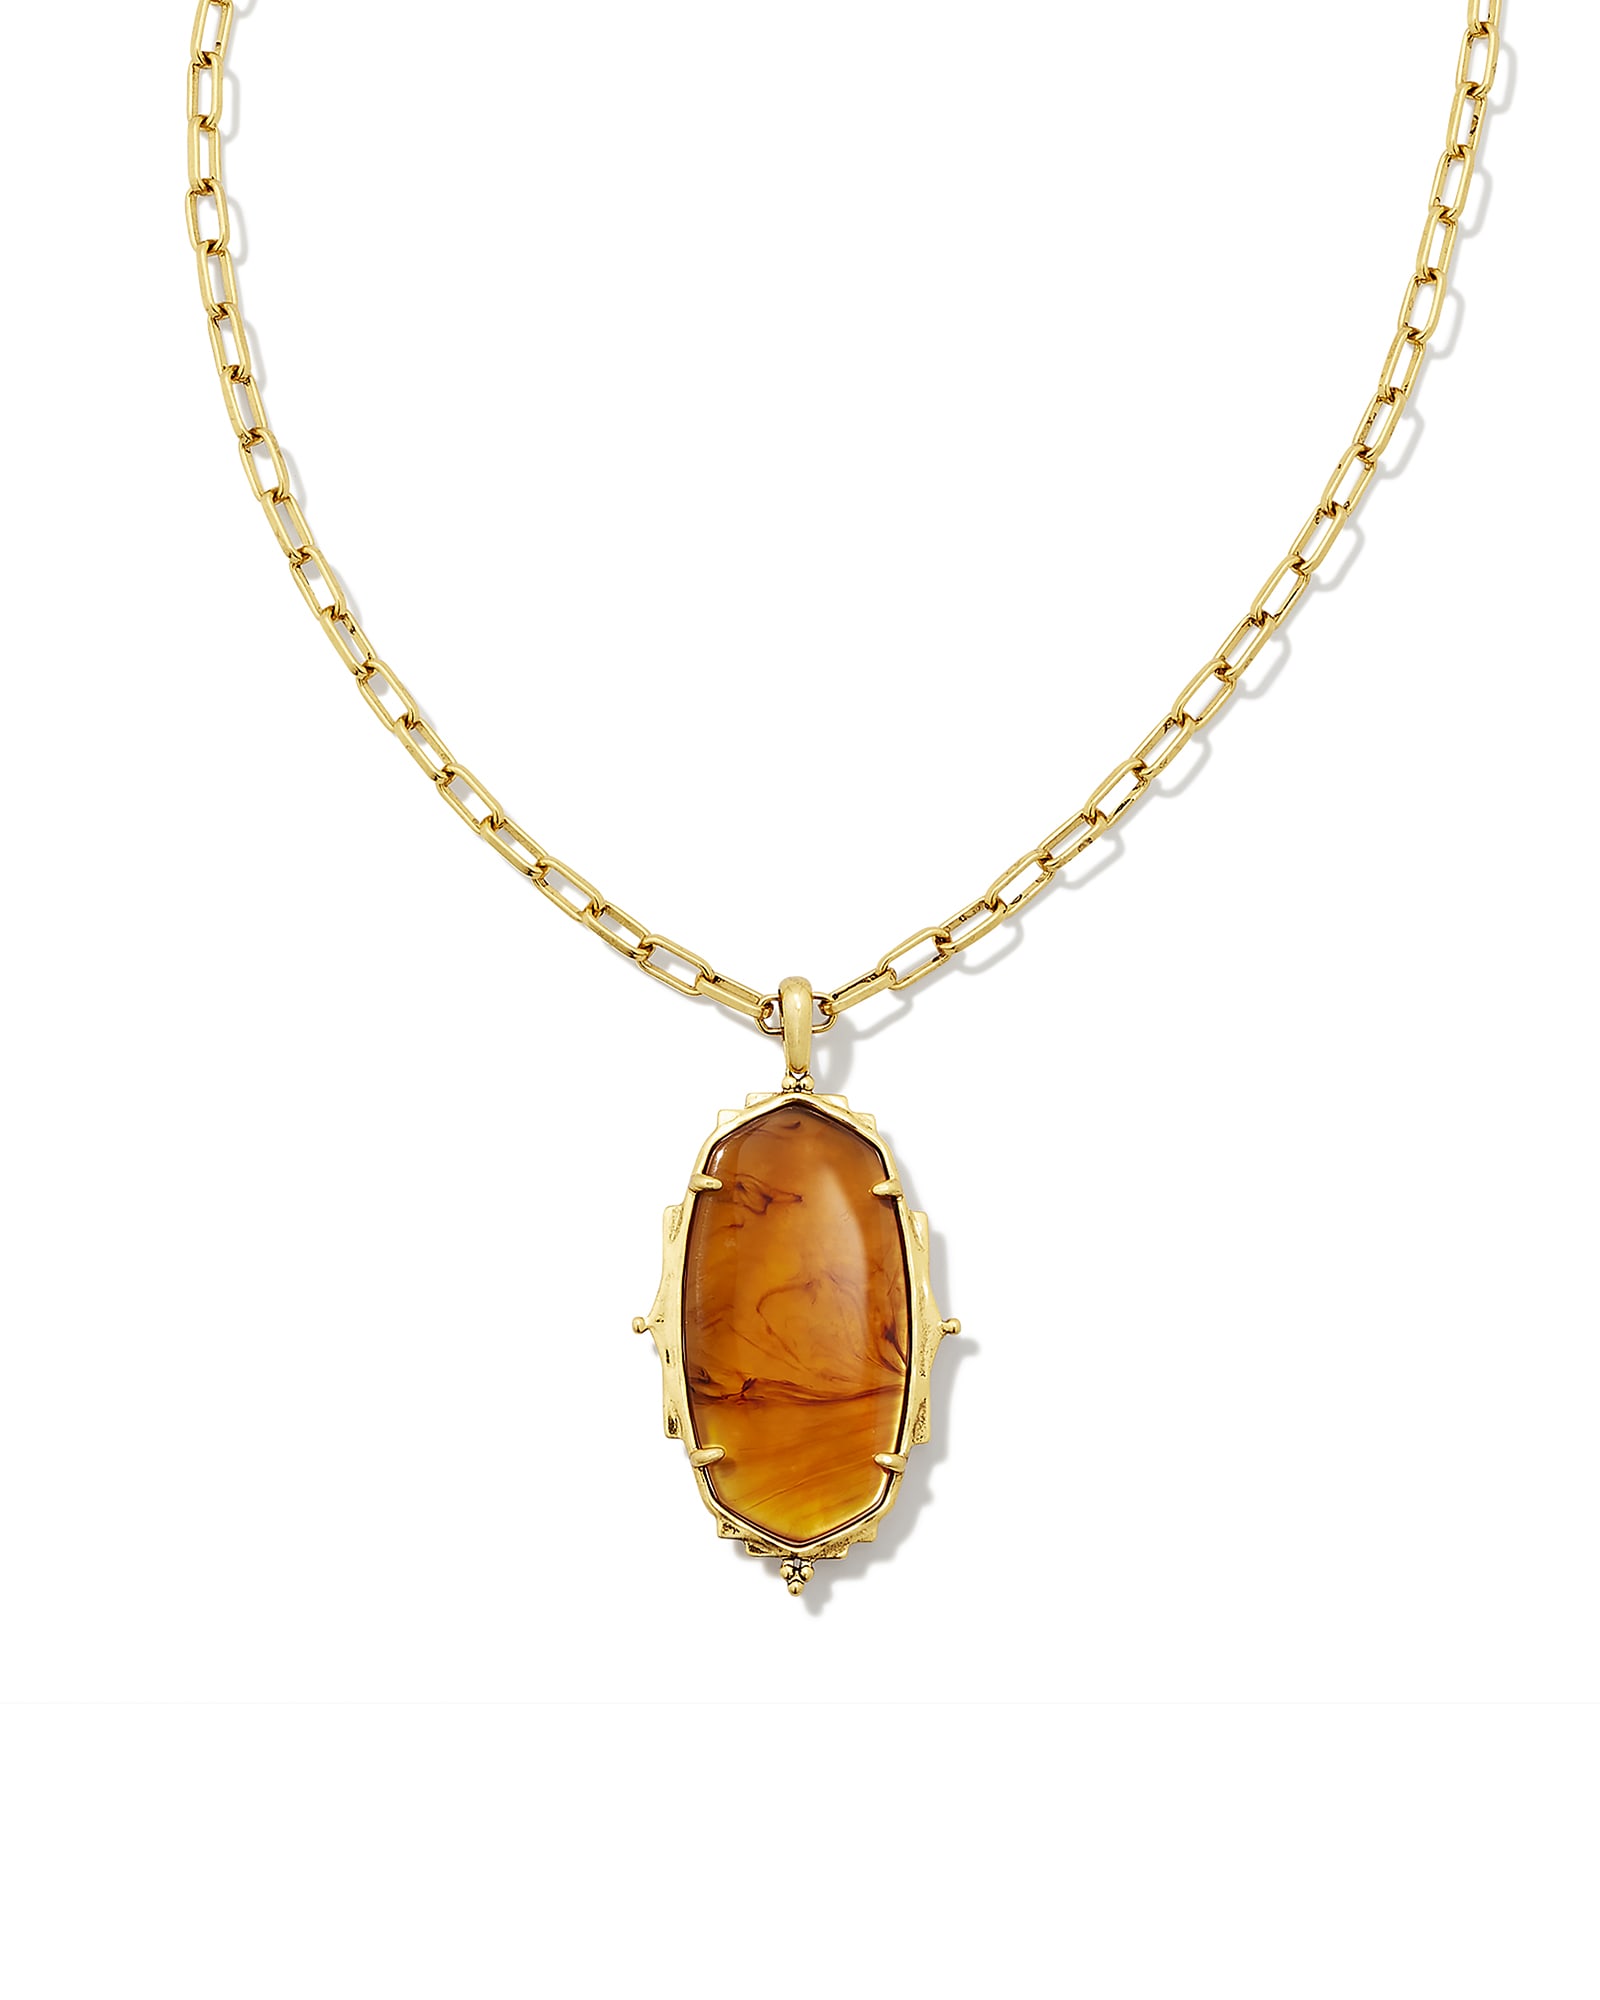 Kendra Scott Baroque Vintage Gold Ella Long Pendant Necklace in Marbled Amber Illusion | Glass/Mother Of Pearl/Metal